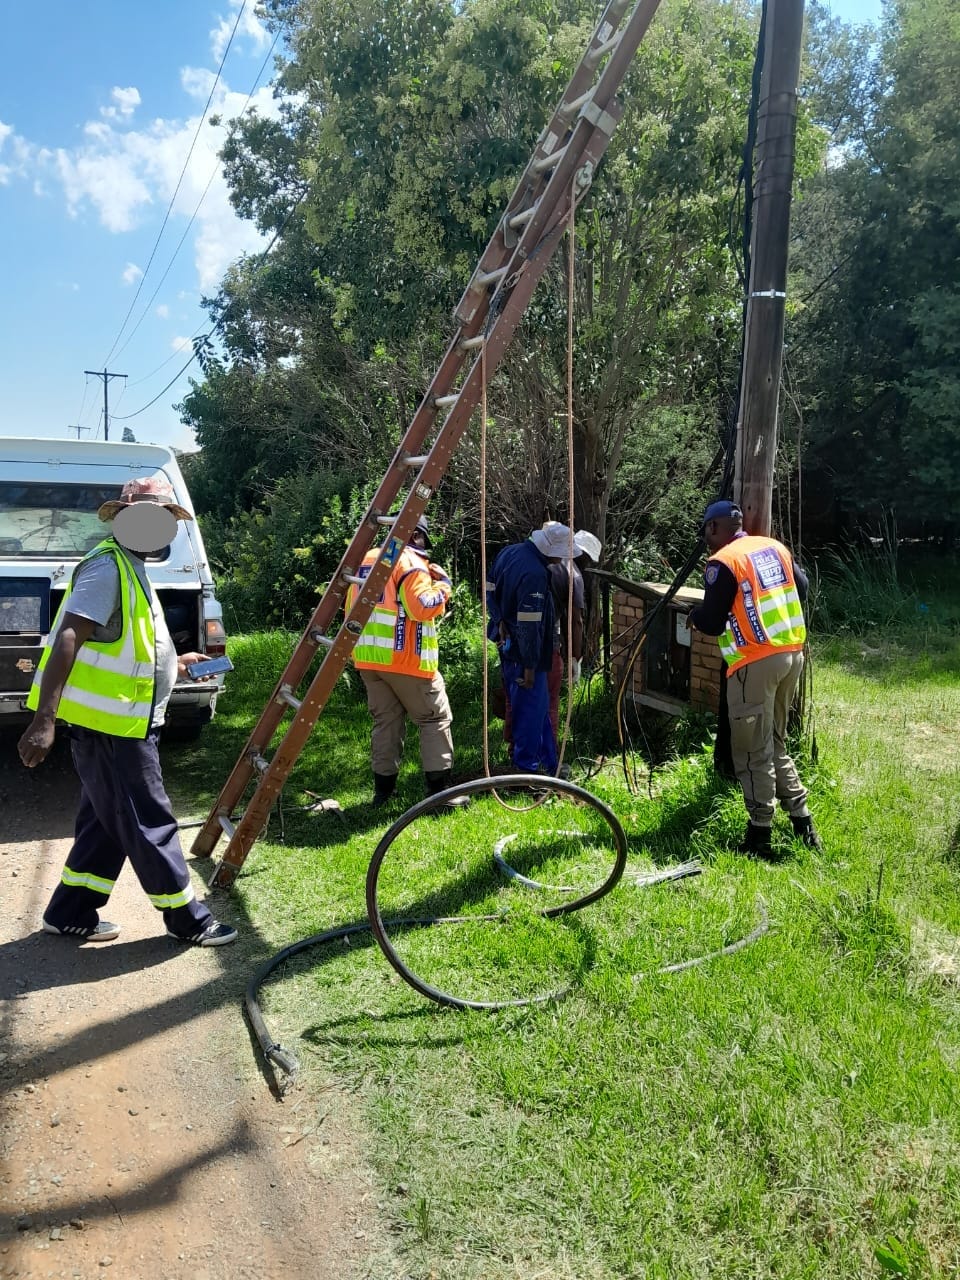 EMPD officers attended to complaints of illegal electricity connections and air pollution in Putfontein